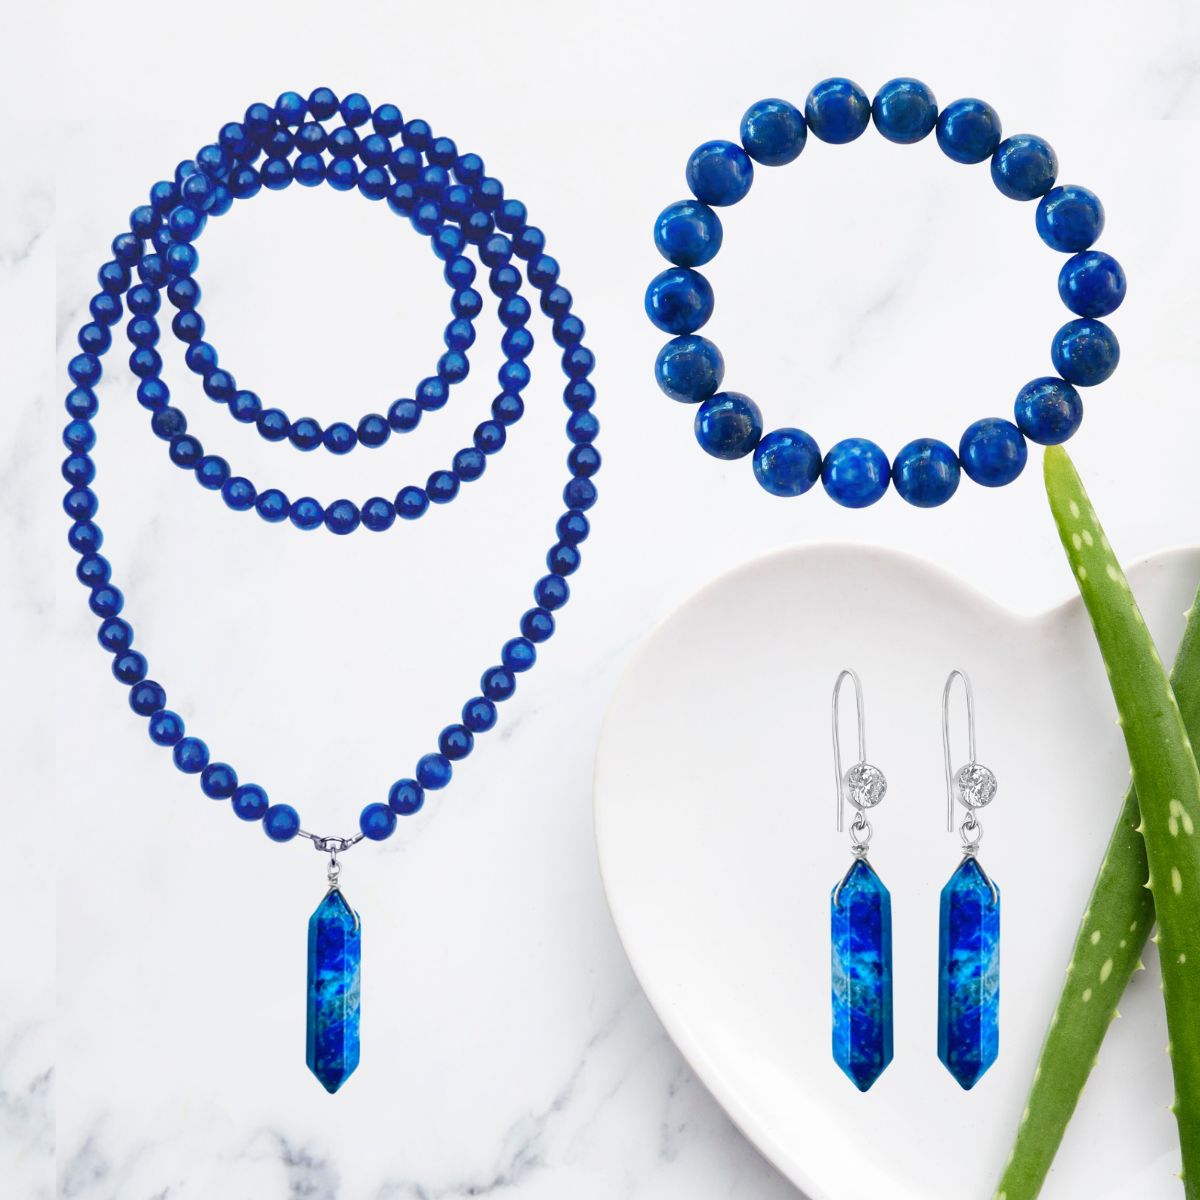 The Lapis Lazuli Meditation Necklace, Bracelet and Earring Set combines natural beauty with spiritual significance. 